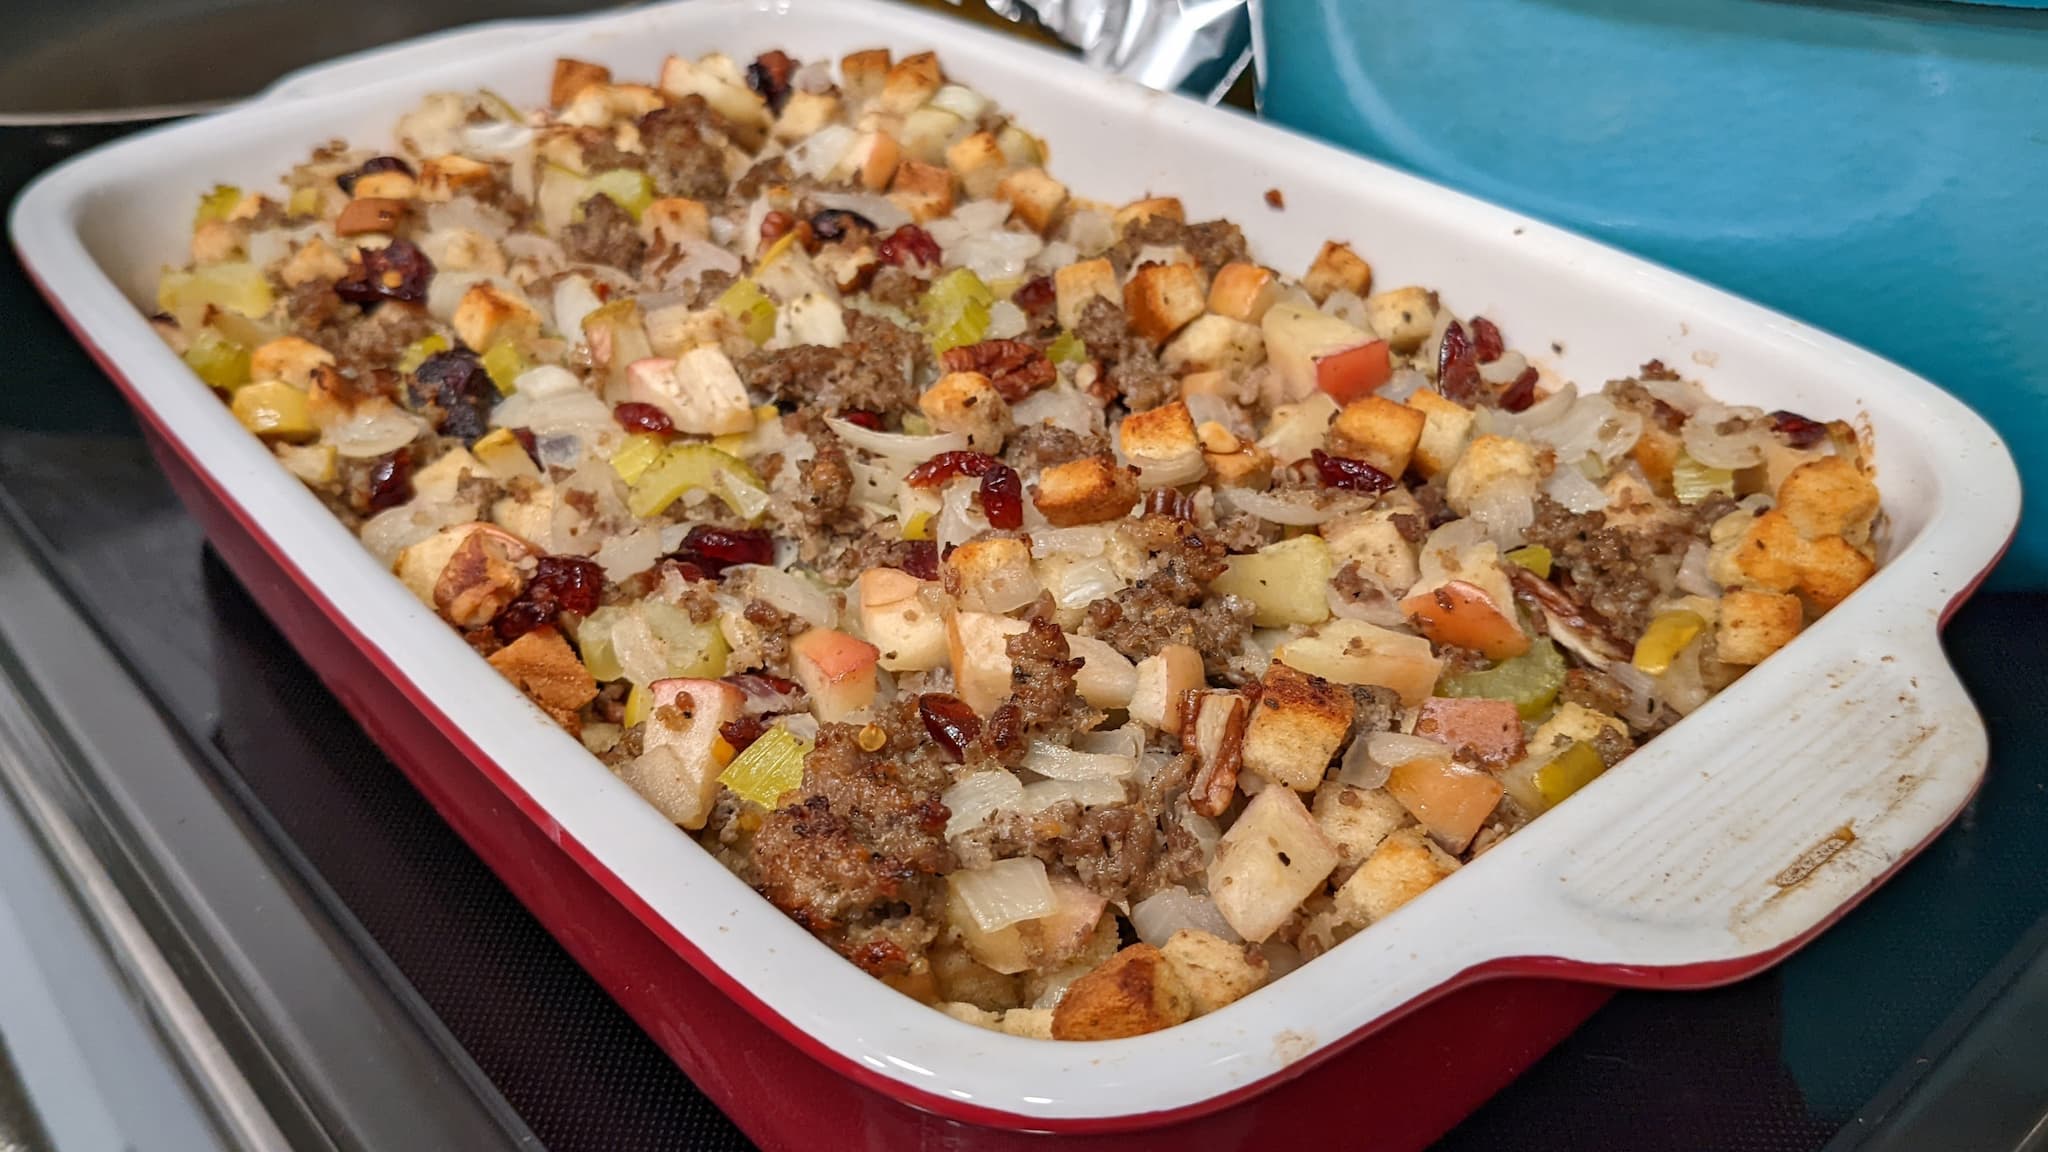 casserole dish filled with stuffing, sausage, apples and other diced ingredients.